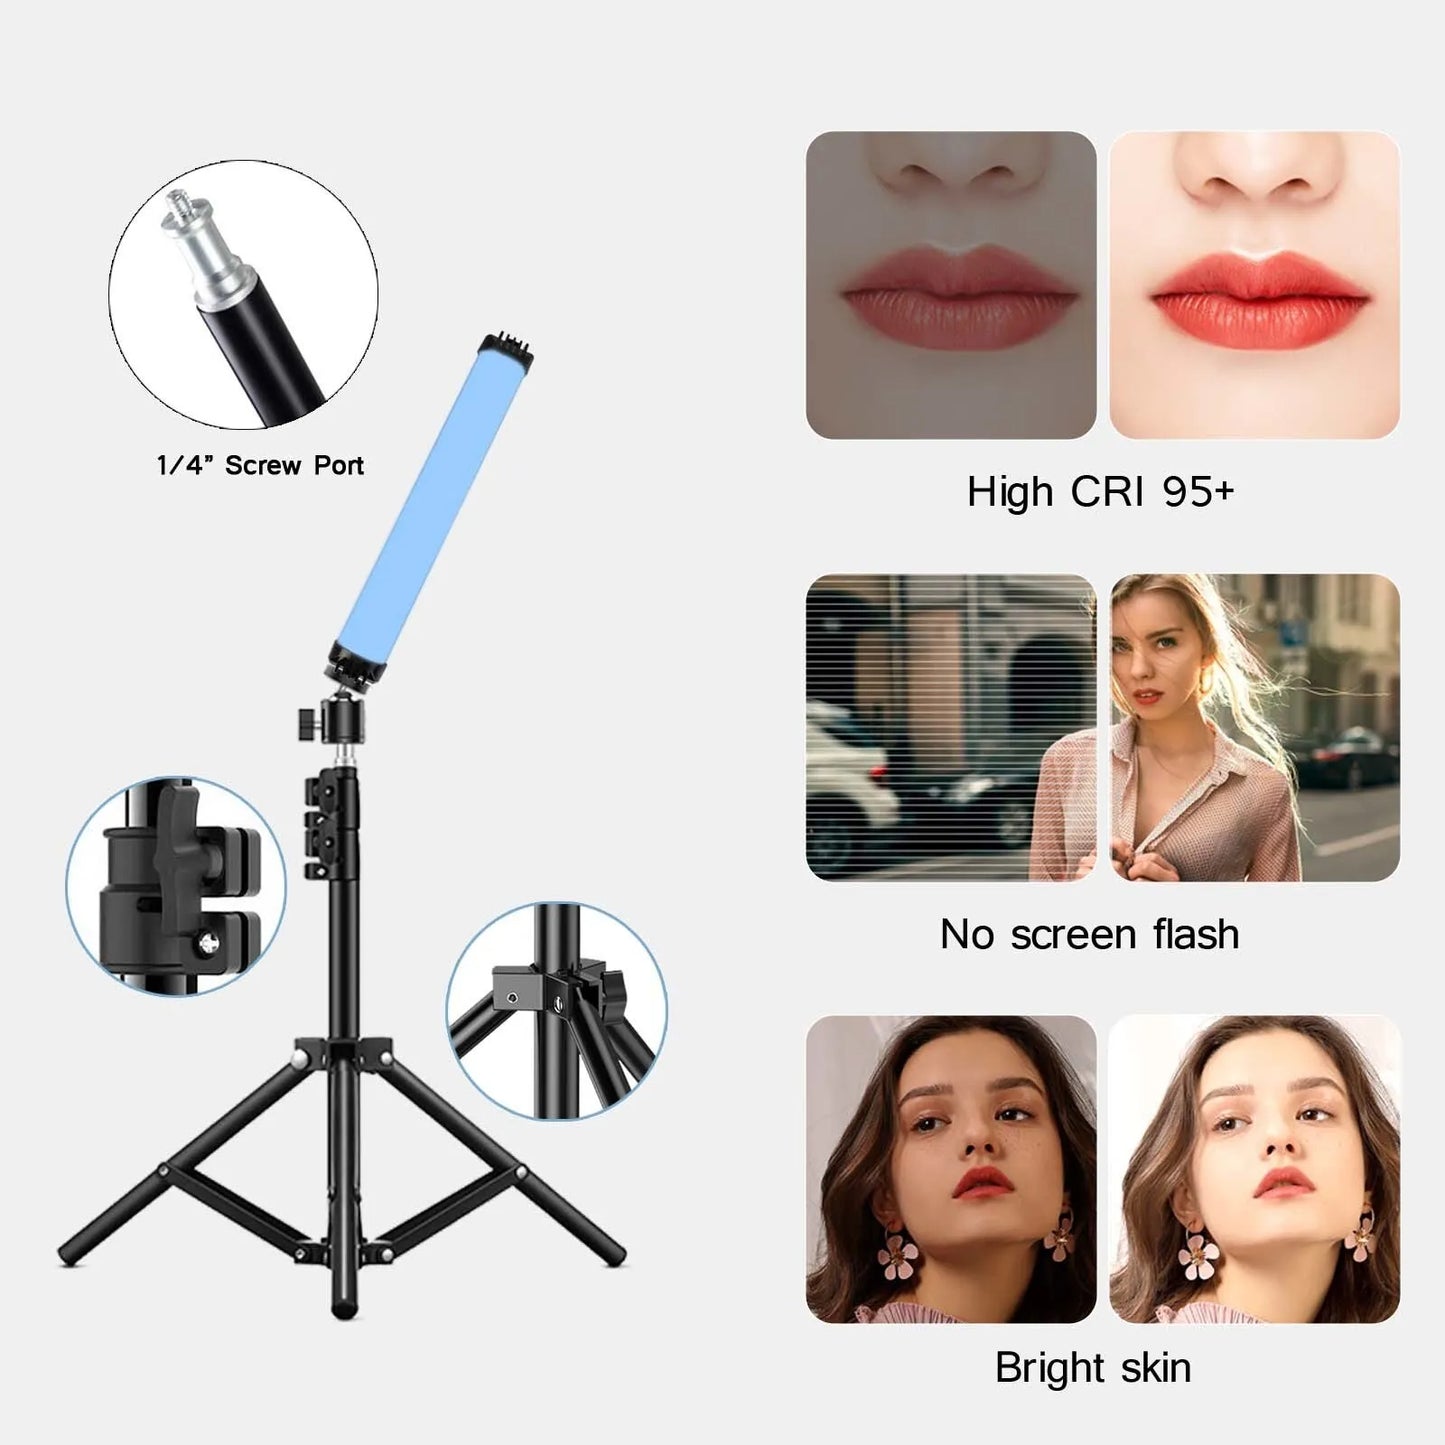 Portable RGB Magnetic Photography Lighting Handheld LED Fill Light Stick Lamp Vlog Fill Light For YouTube Video Picture Shooting